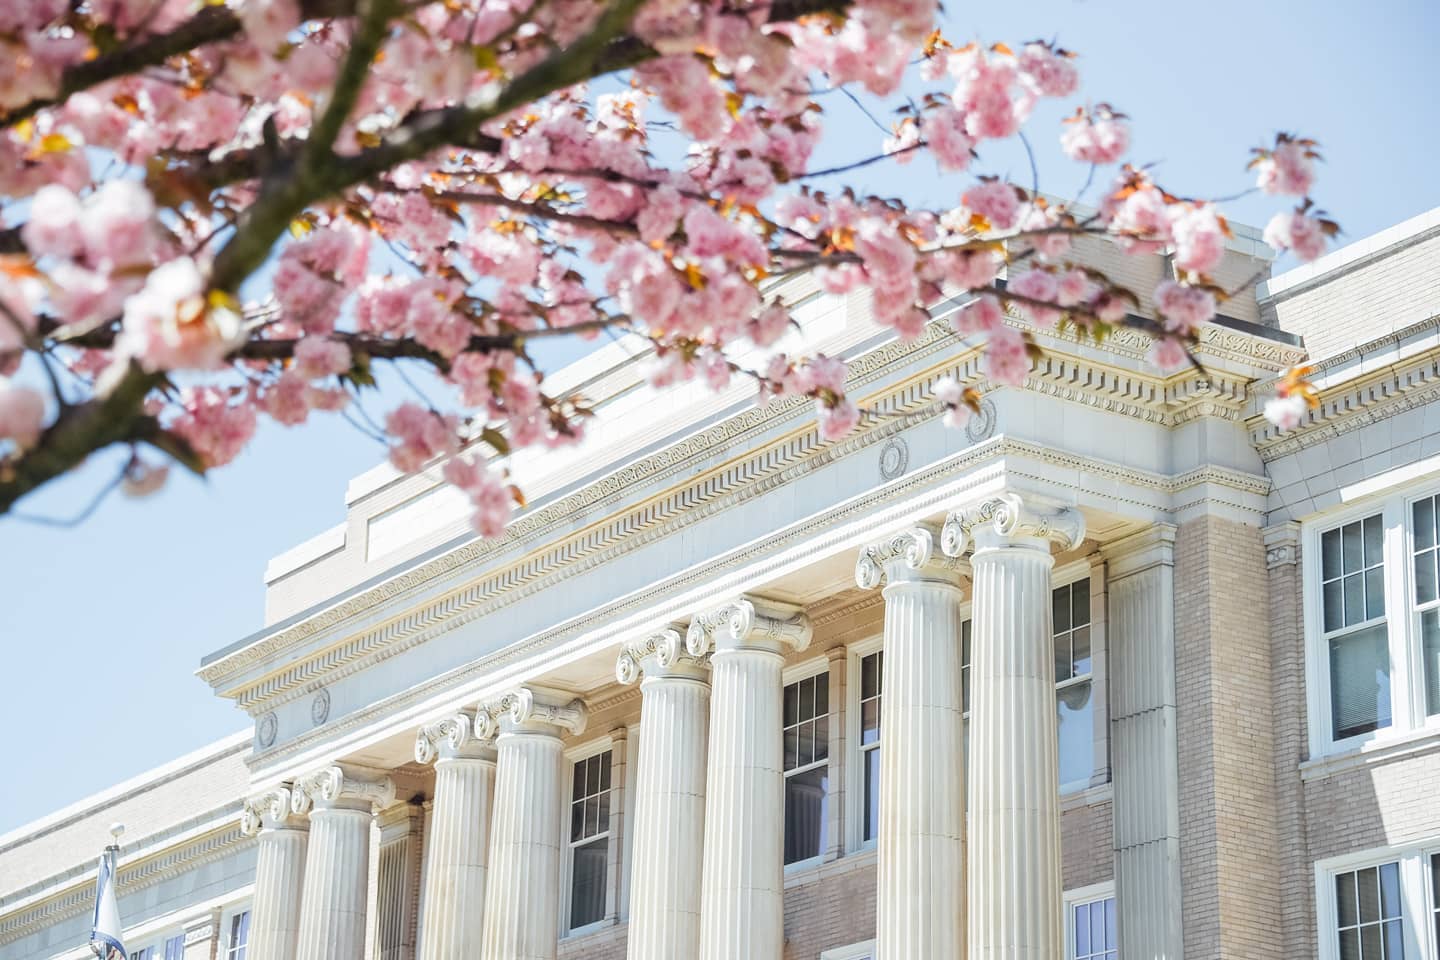 The classical columns and architecture of a marble building are framed by tree branches covered in pink blossoms